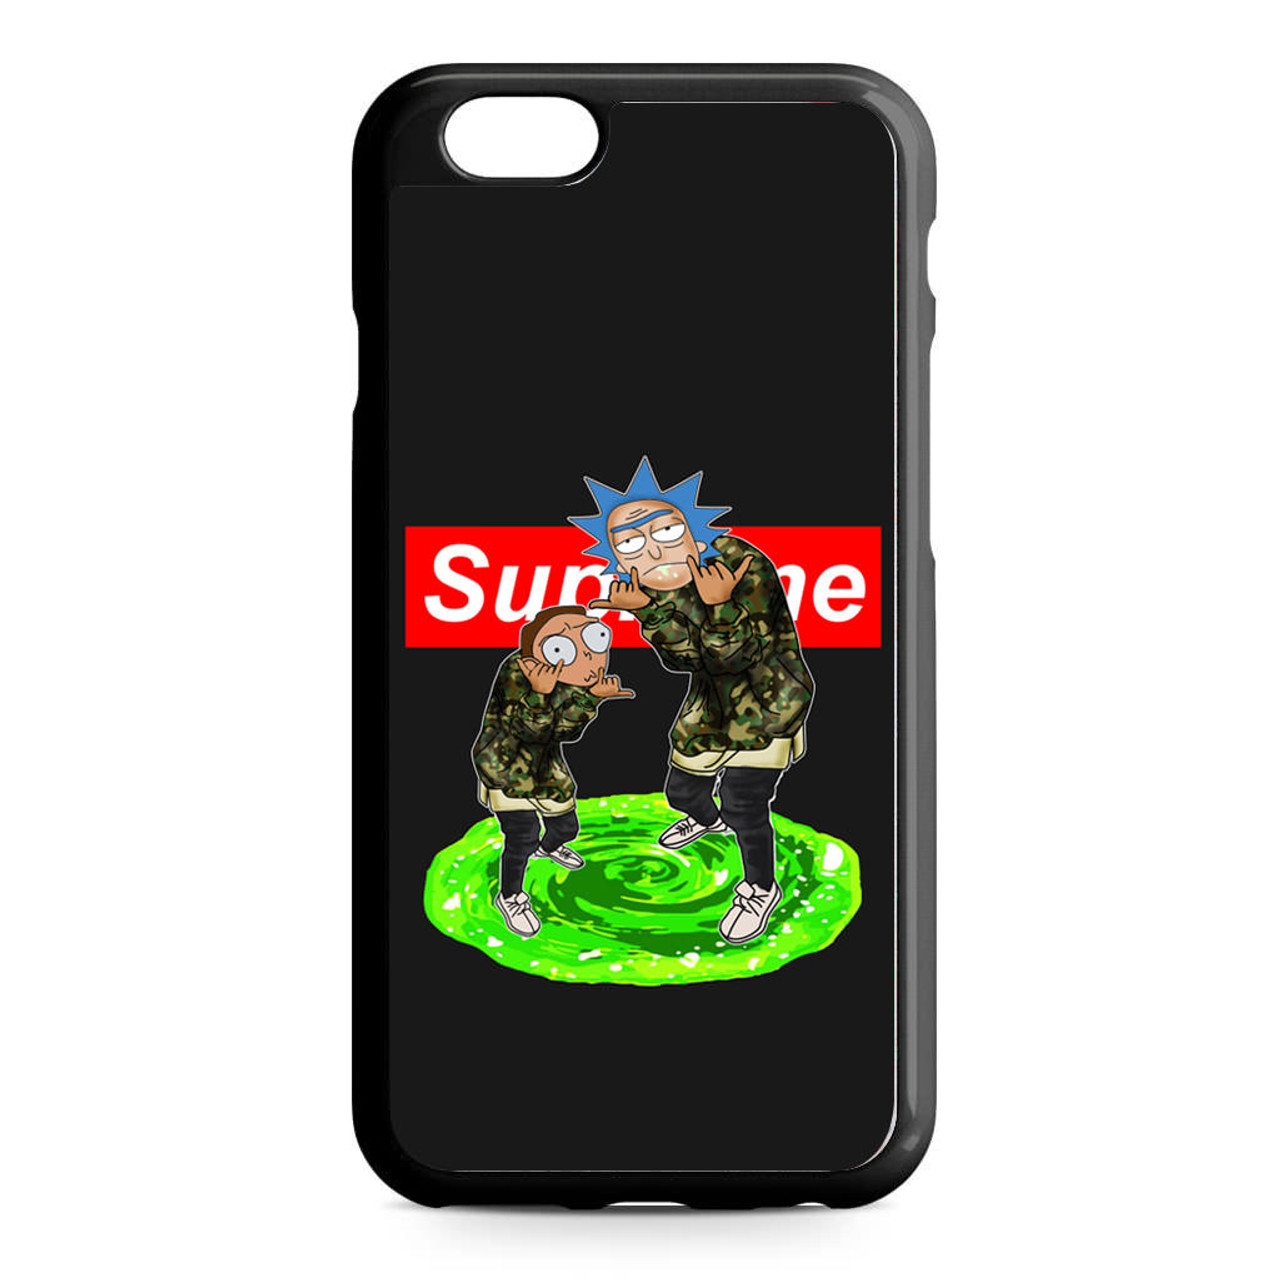 Rick and Morty iPhone 6/6S Case -